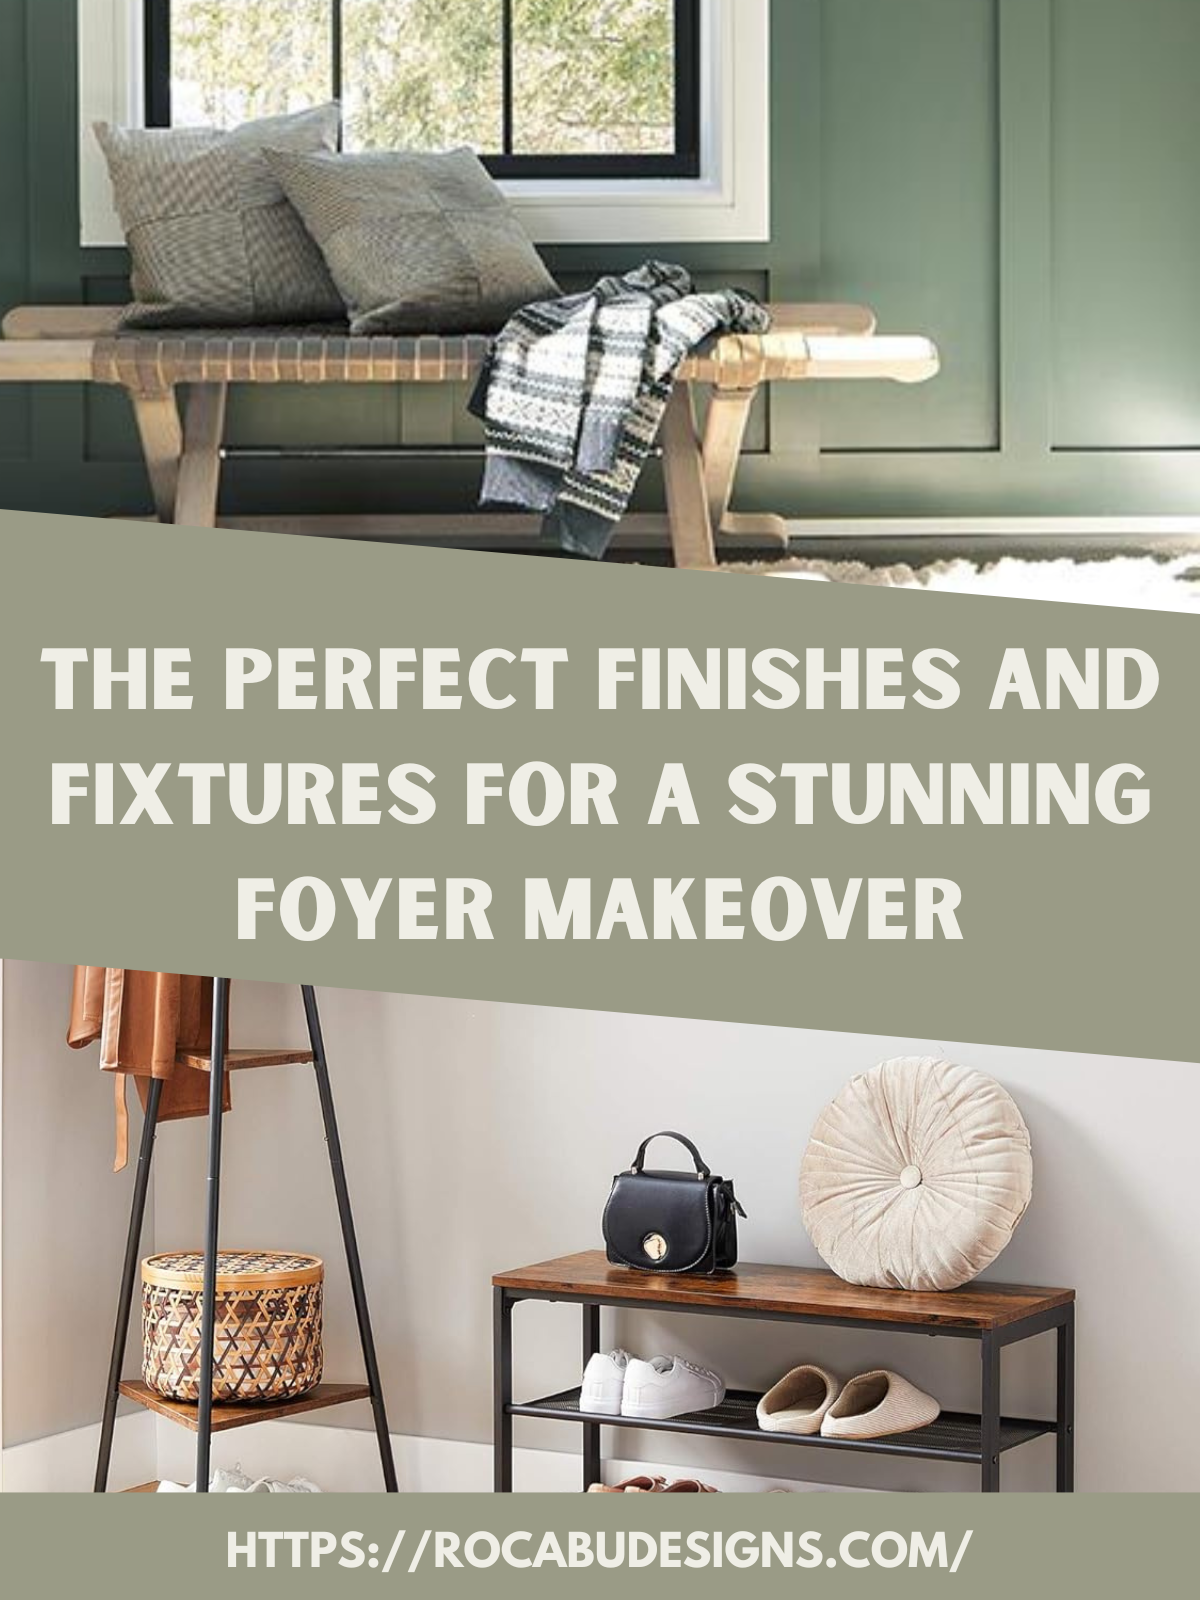 The Perfect Finishes and Fixtures for a Stunning Foyer Makeover